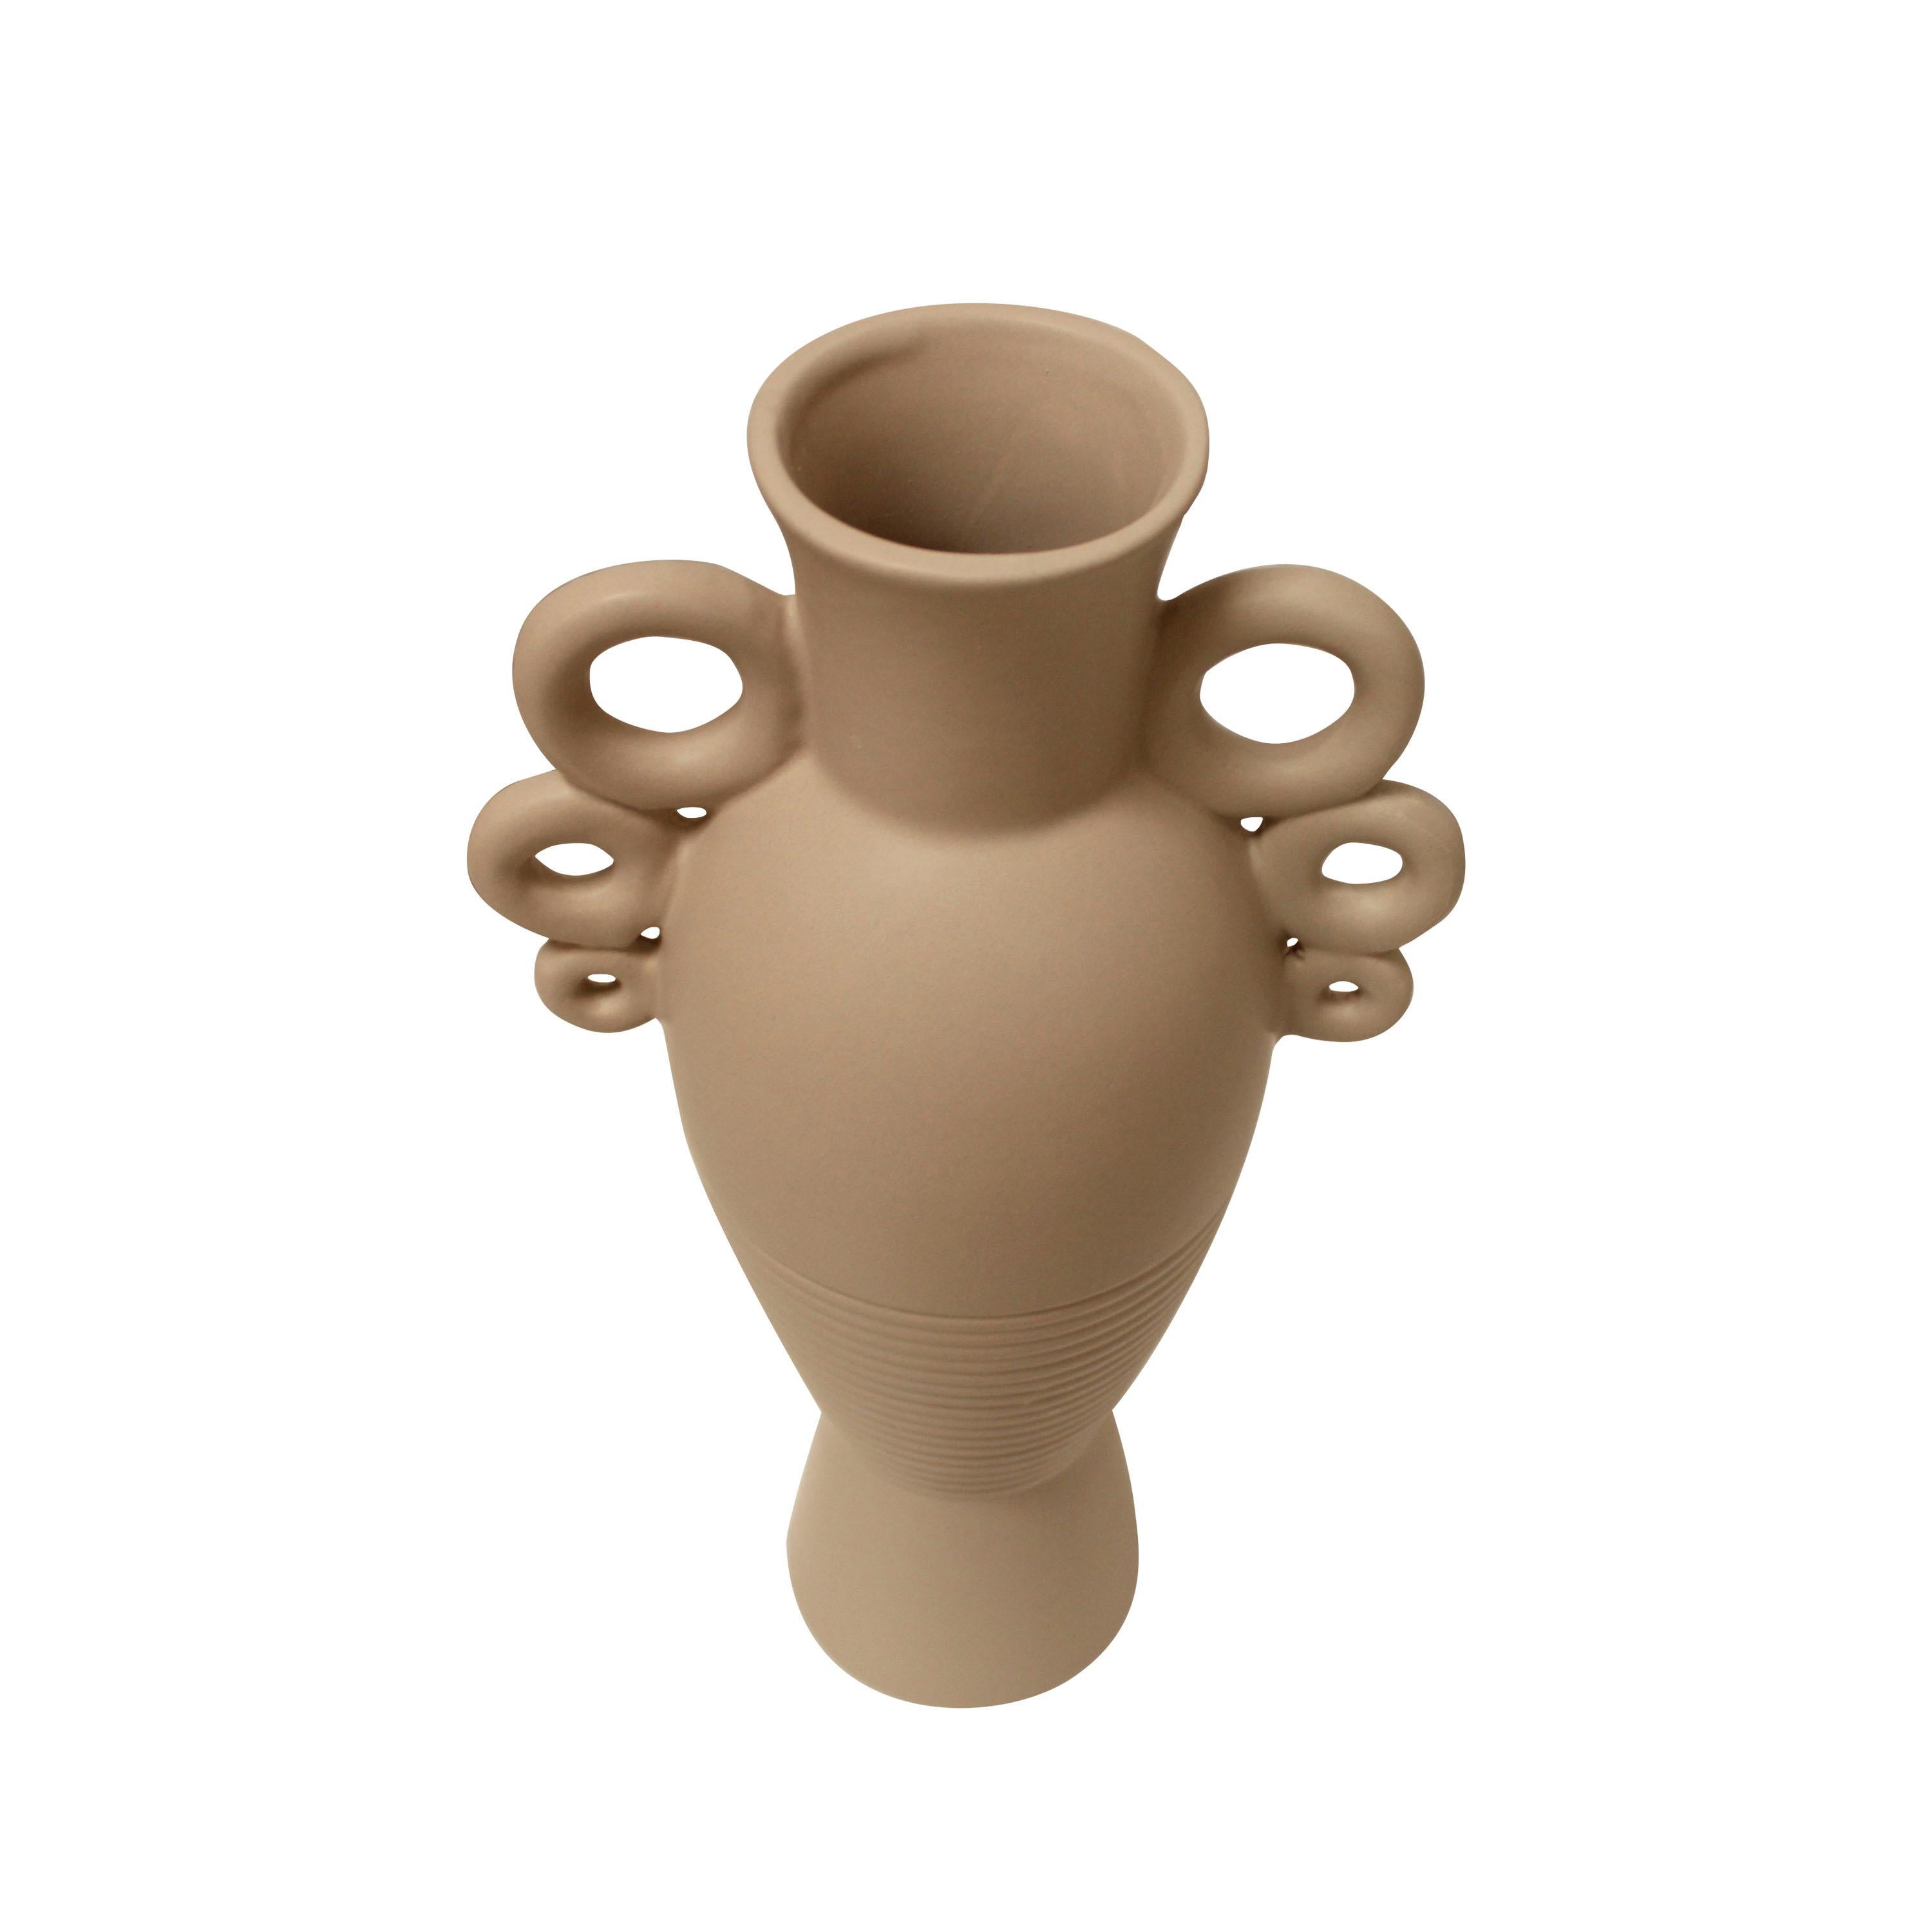 An Italian ceramic vase with a baluster-shaped body and a cylindrical neck painted Beige-grey. The vase featured two handles made of 3 connected ceramic rings and an engraved lines decoration.